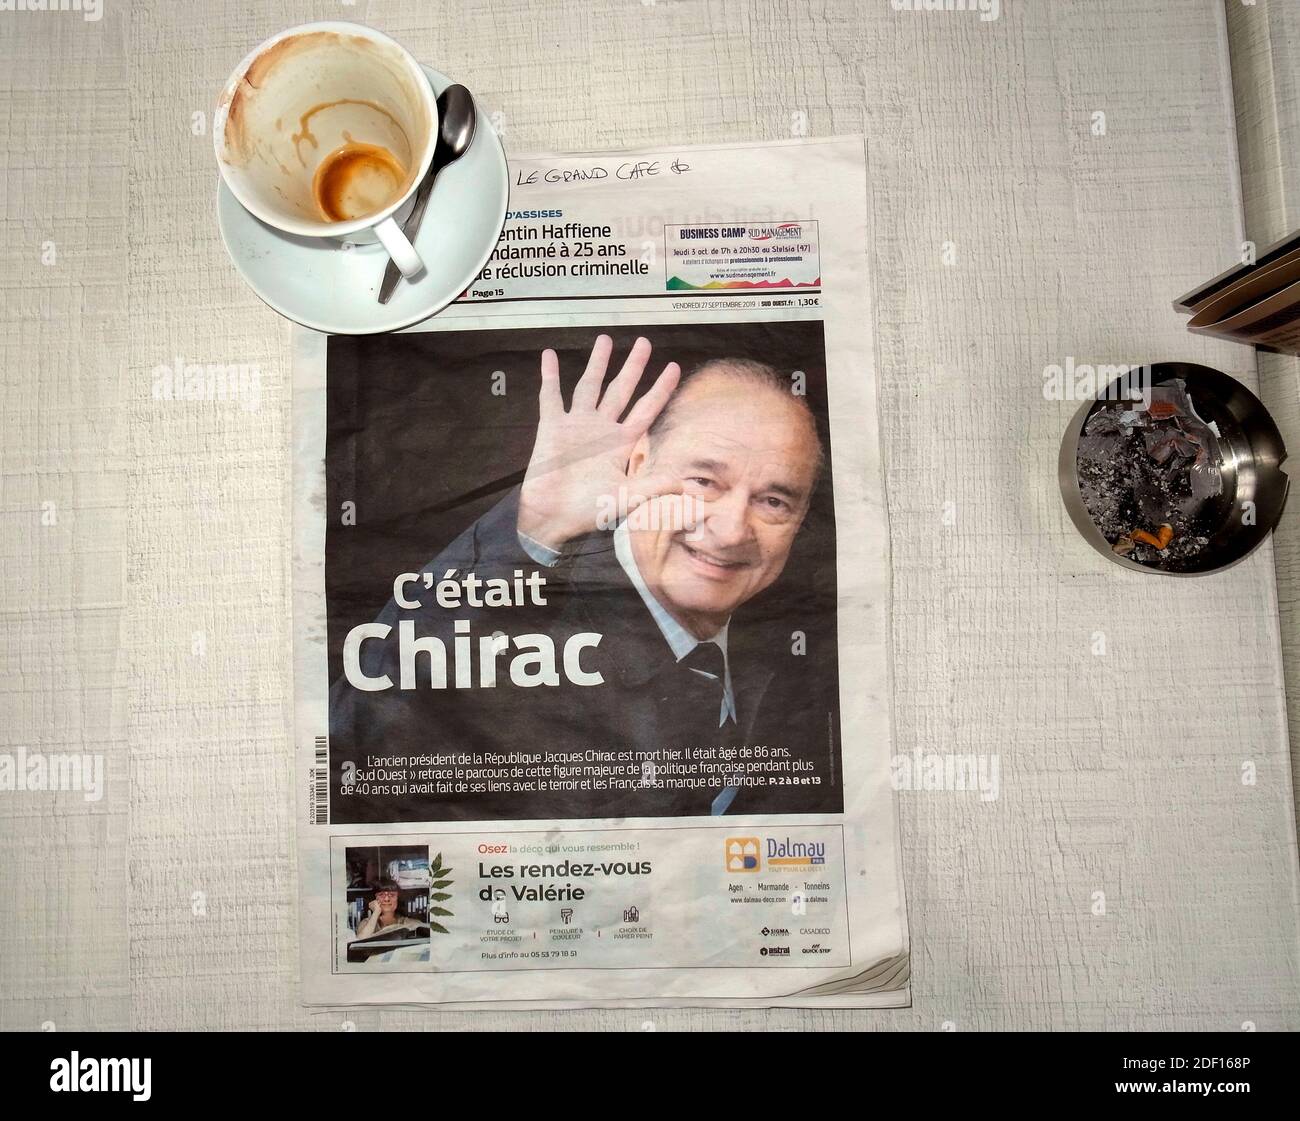 AJAXNETPHOTO. 27TH SEPTEMBER, 2019. PAU, FRANCE. - FRONT PAGE NEWS - A  PHOTO OF SMILING AND WAVING ONE TIME FRENCH PRESIDENT JACQUES RENE CHIRAC  ADORNS THE FRONT PAGE OF A FRENCH SOUTH-WEST